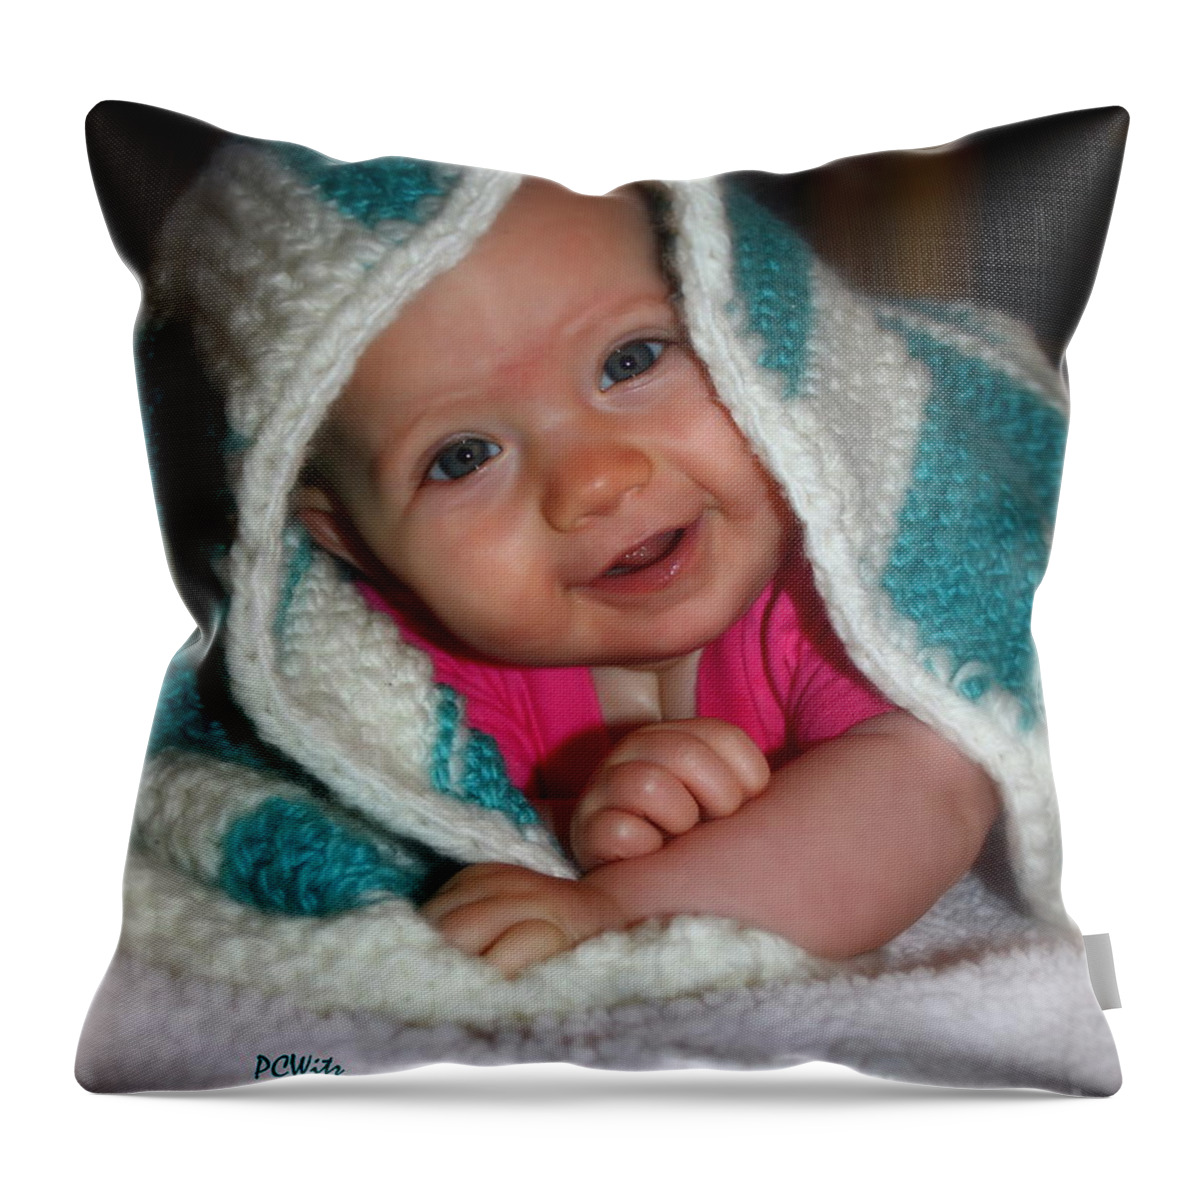 Peek-a-boo Throw Pillow featuring the photograph Peek-a-Boo by Patrick Witz